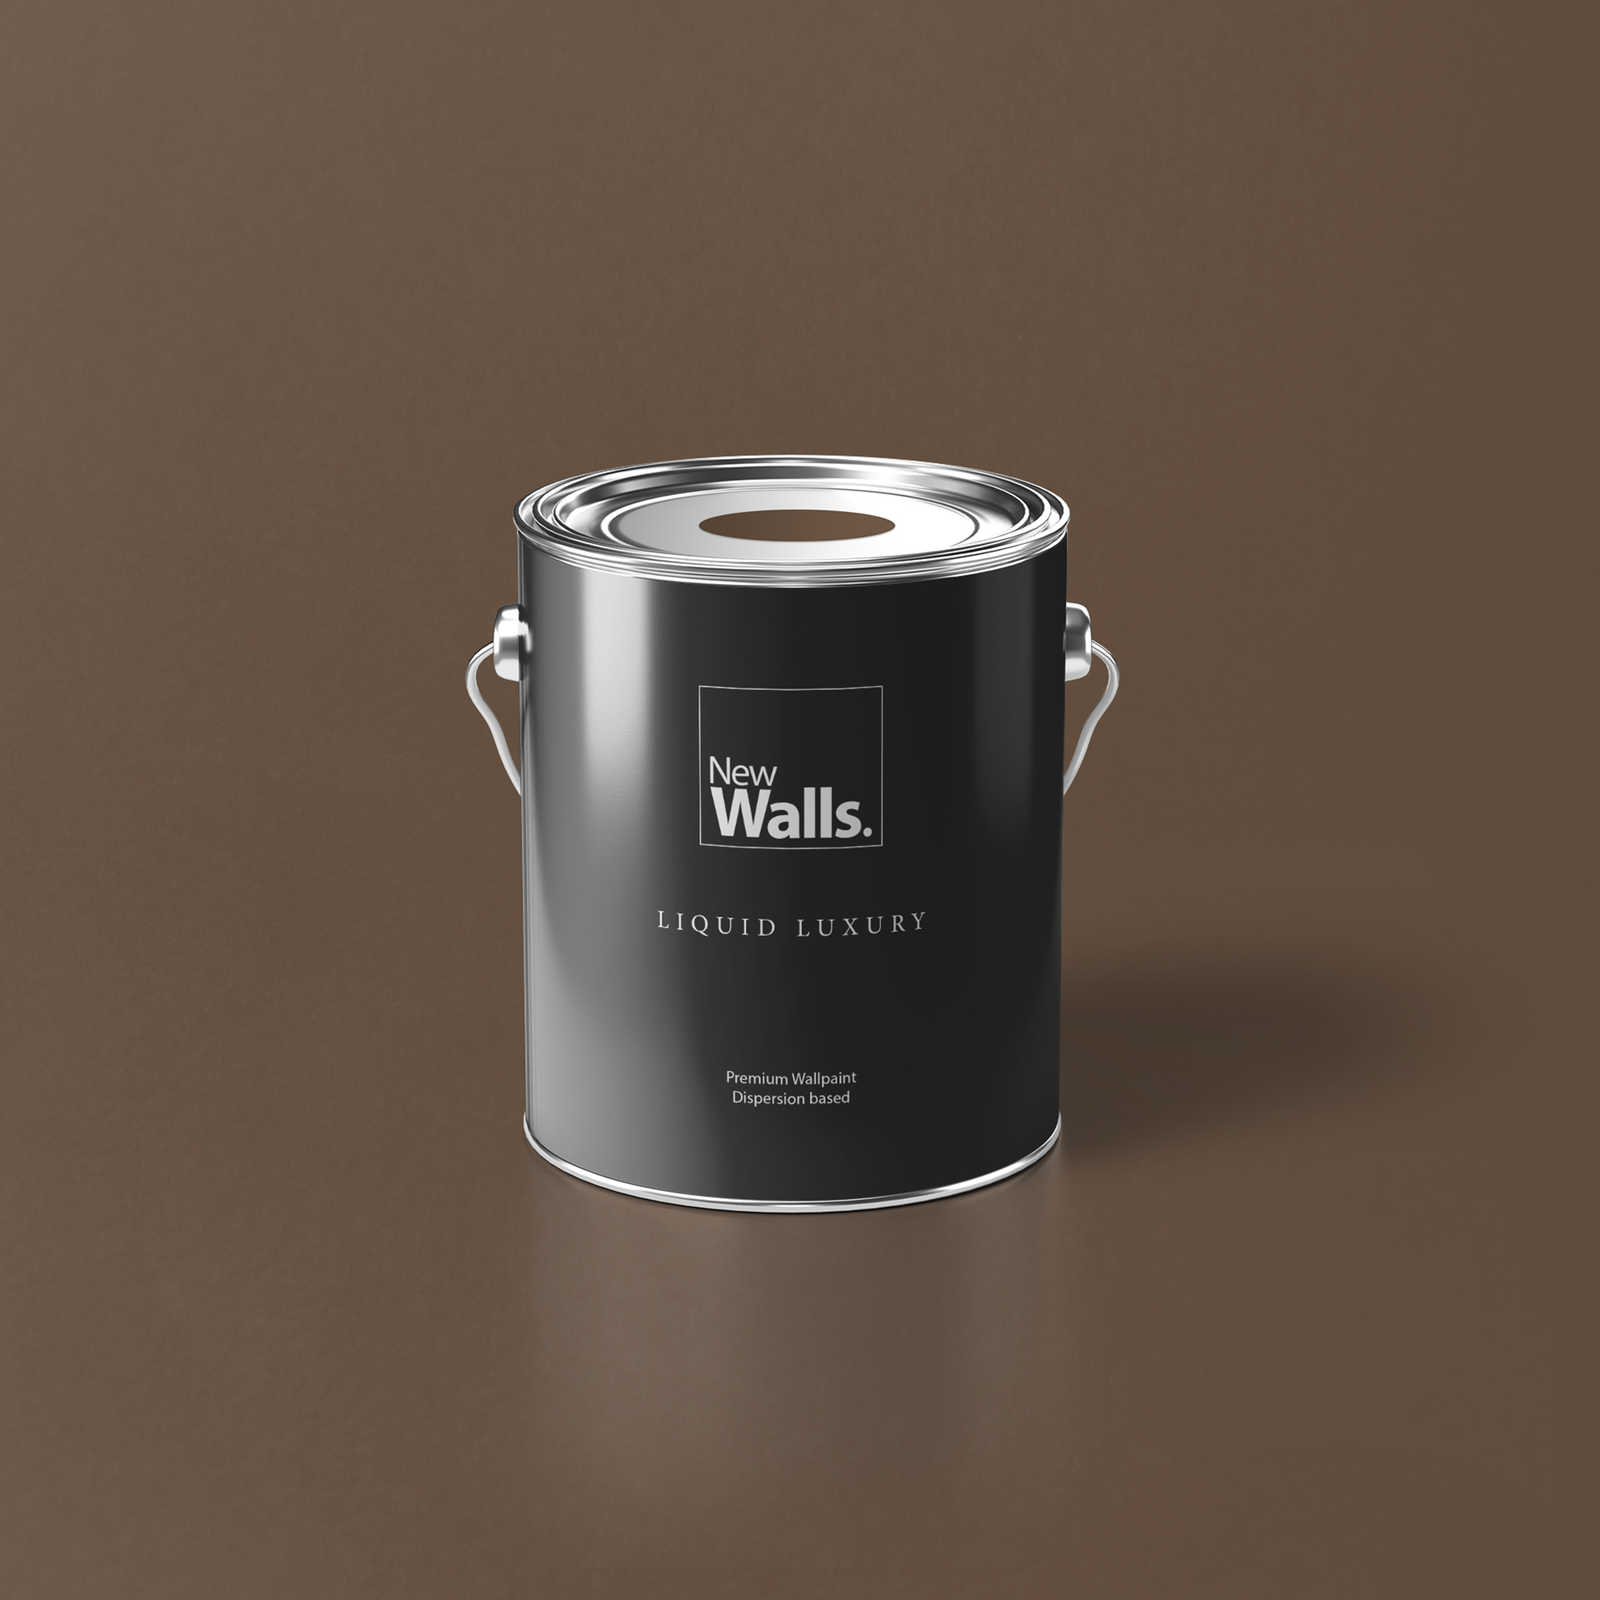 Premium Wall Paint Nature Nut Brown »Modern Mud« NW720 – 2.5 litre
